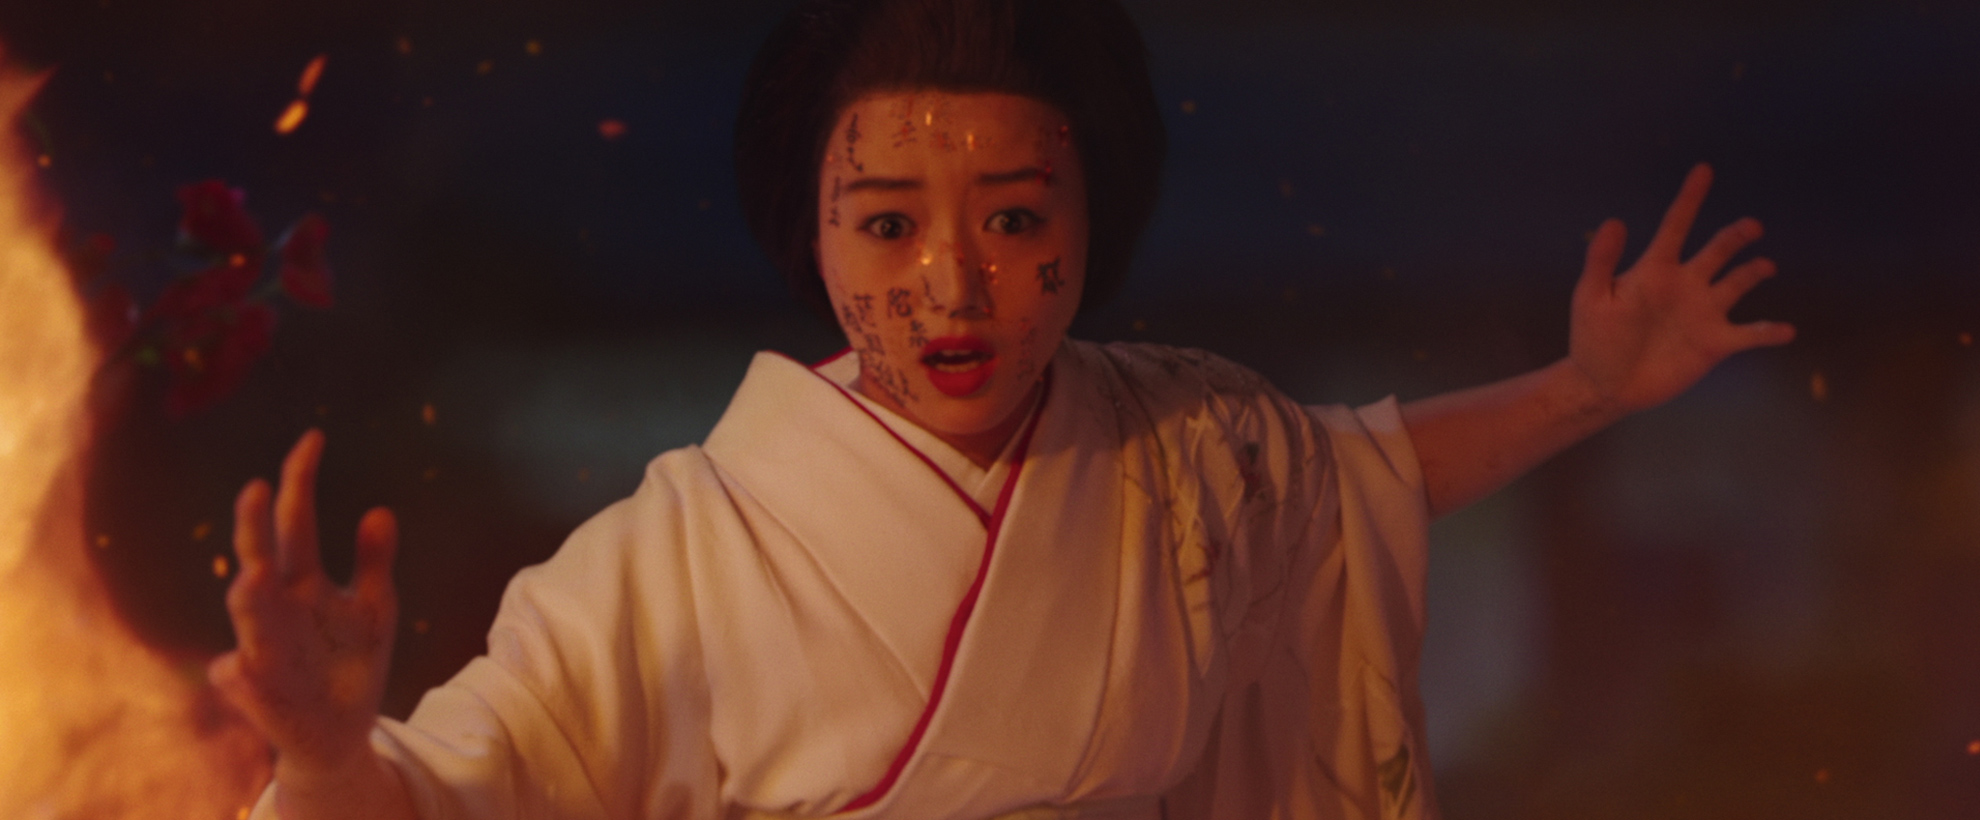 A young asian woman in a white robe, she has multiple small wounds on her face